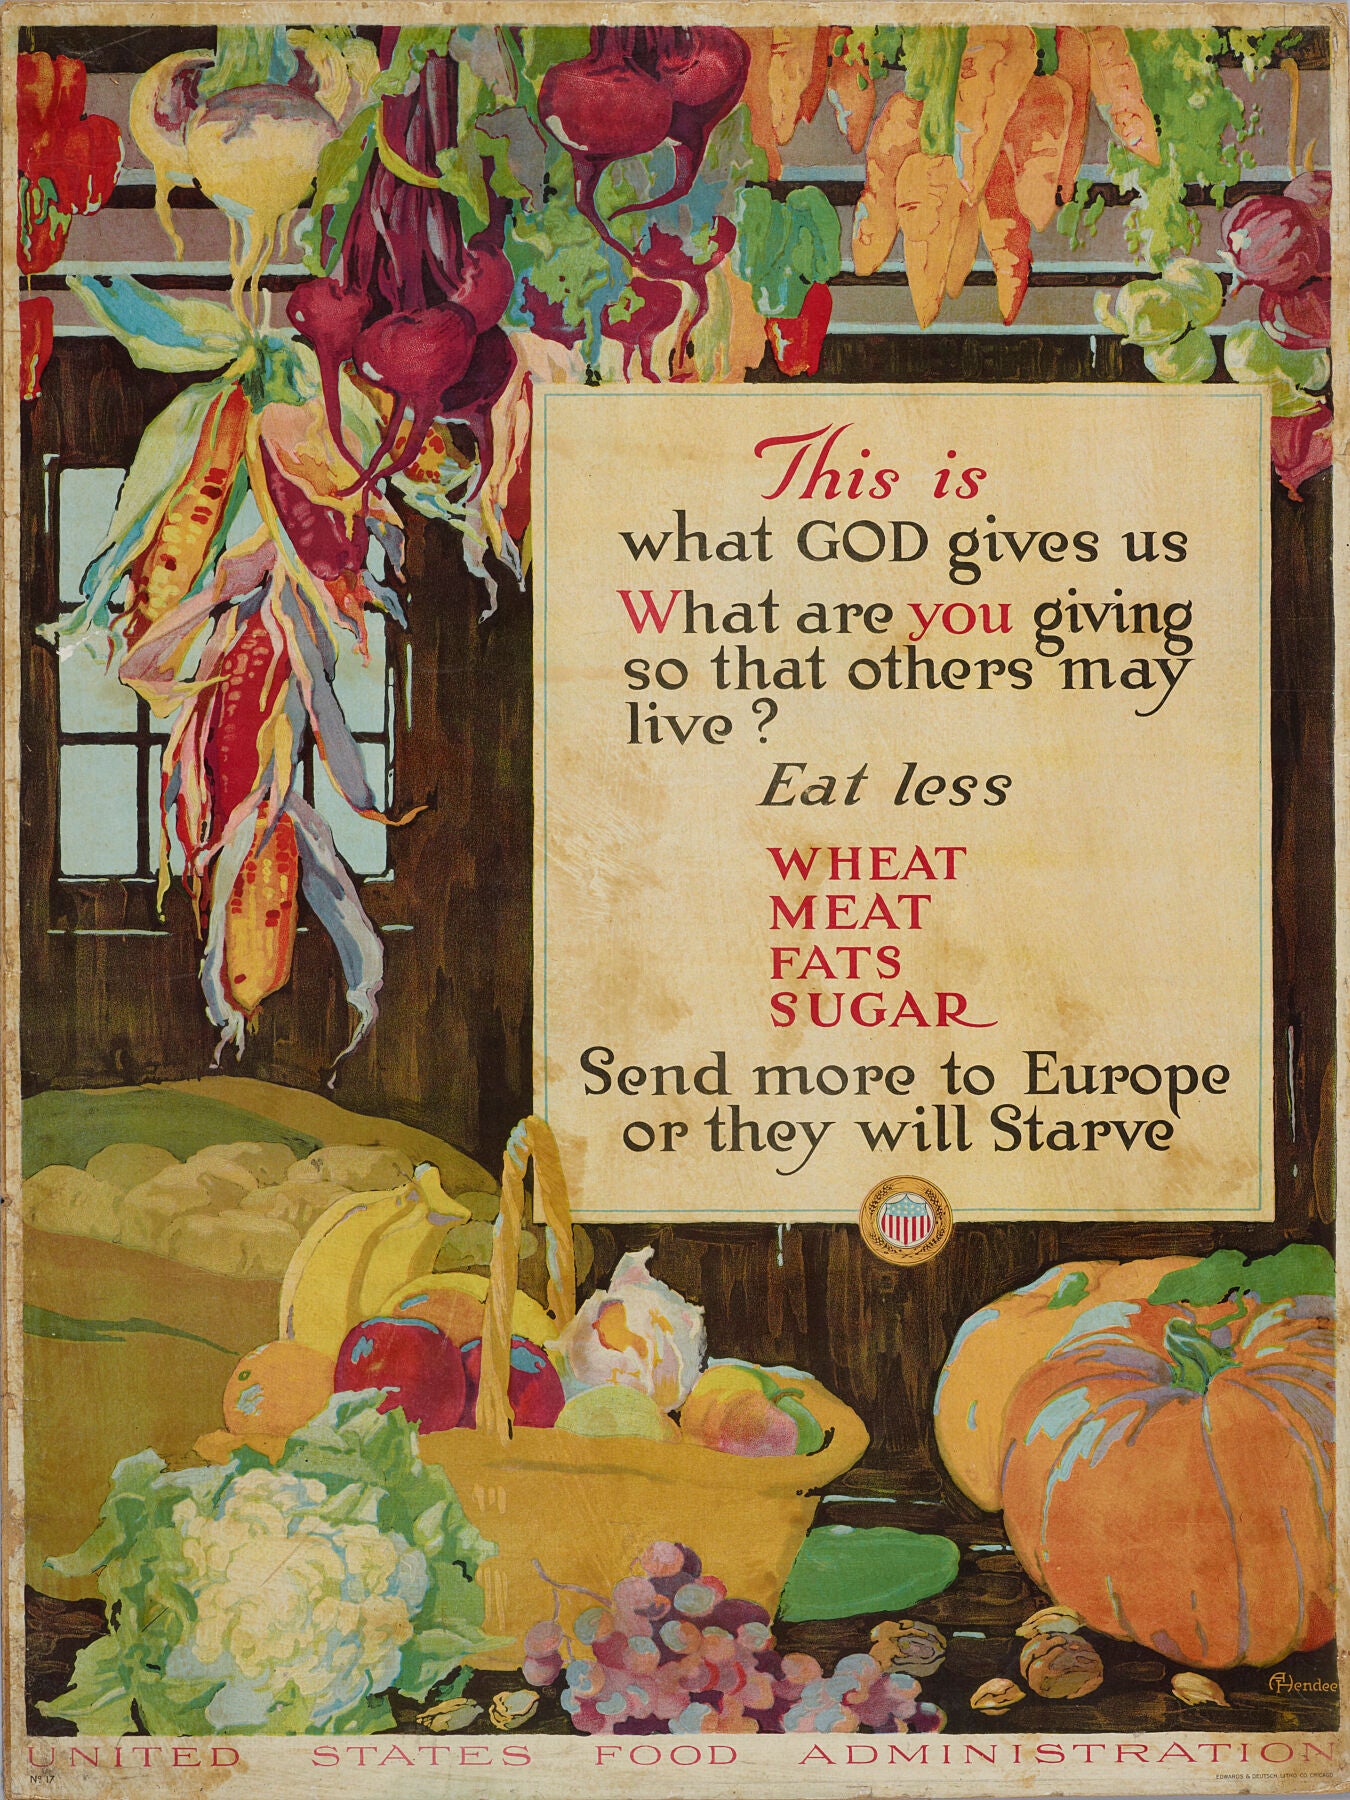 This is what God gives us by A Hendee - circa 1918